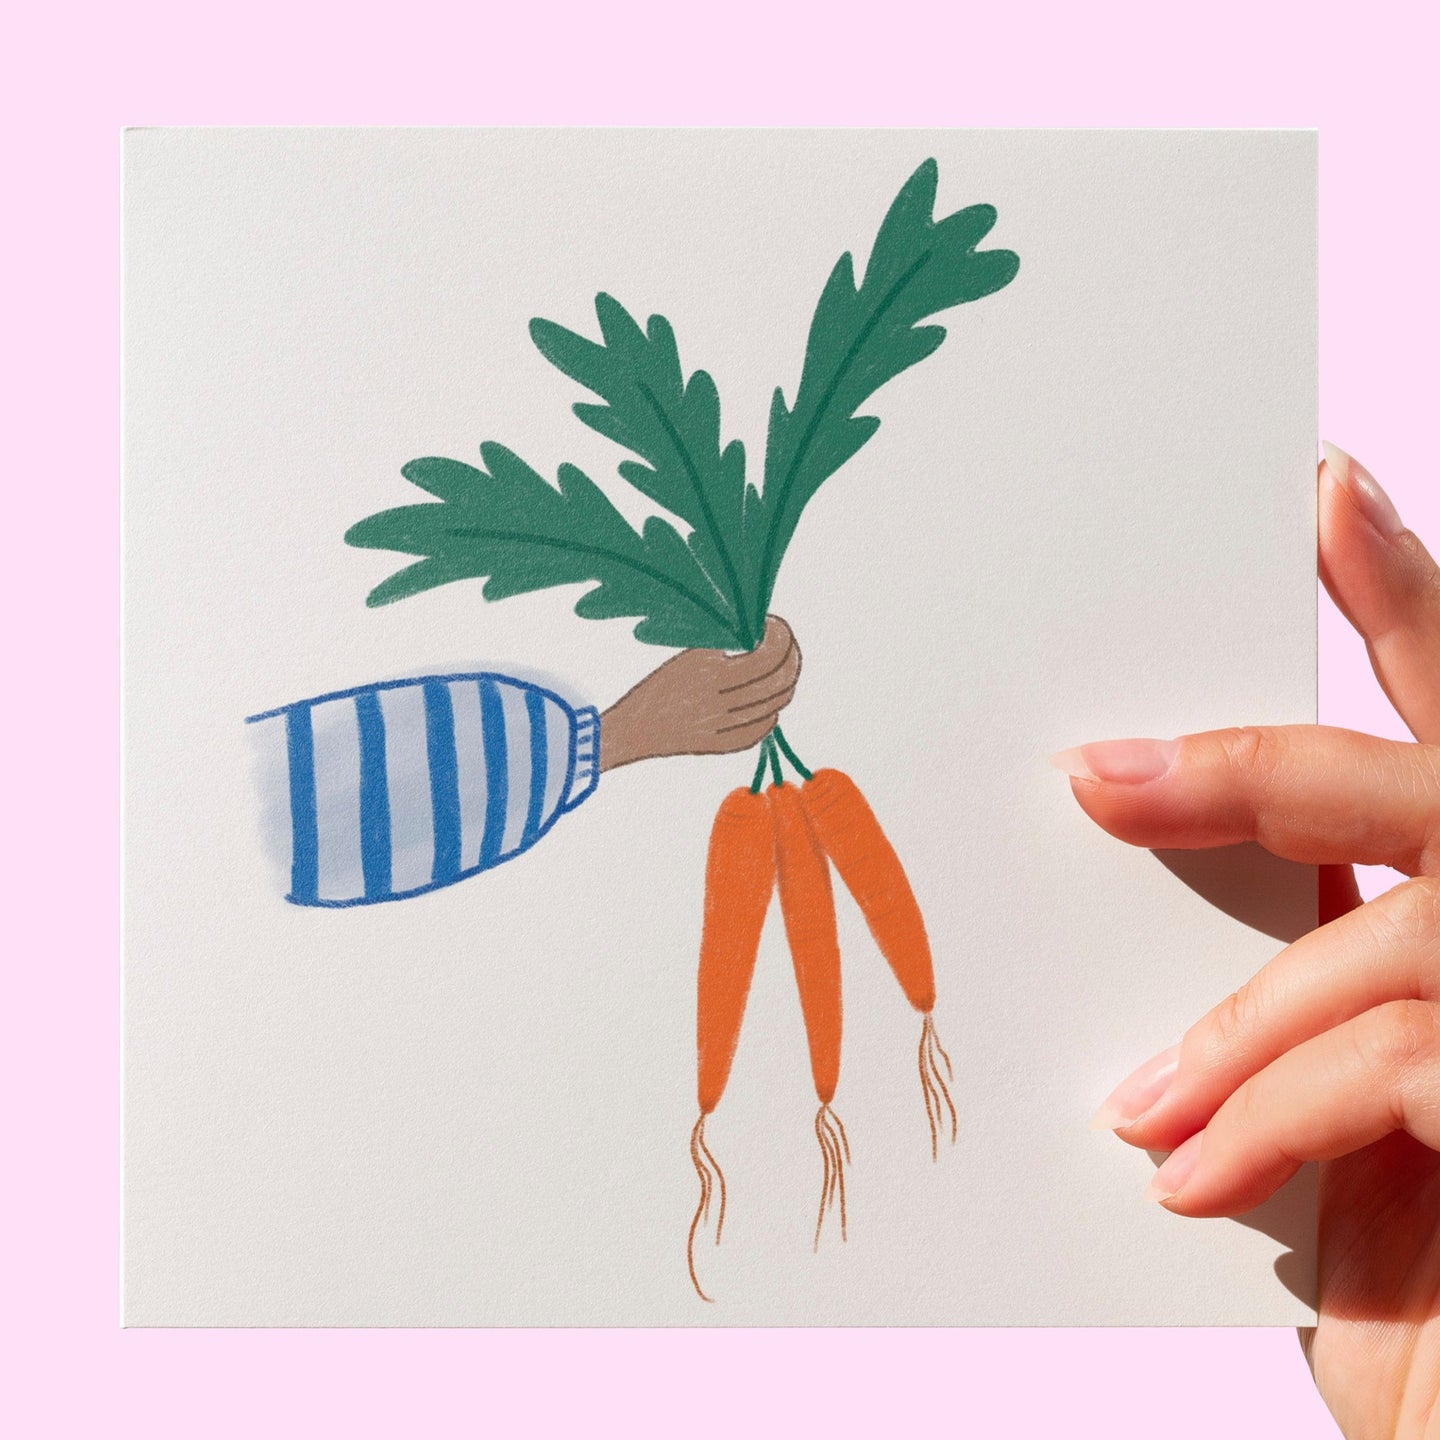 Carrots greeting card